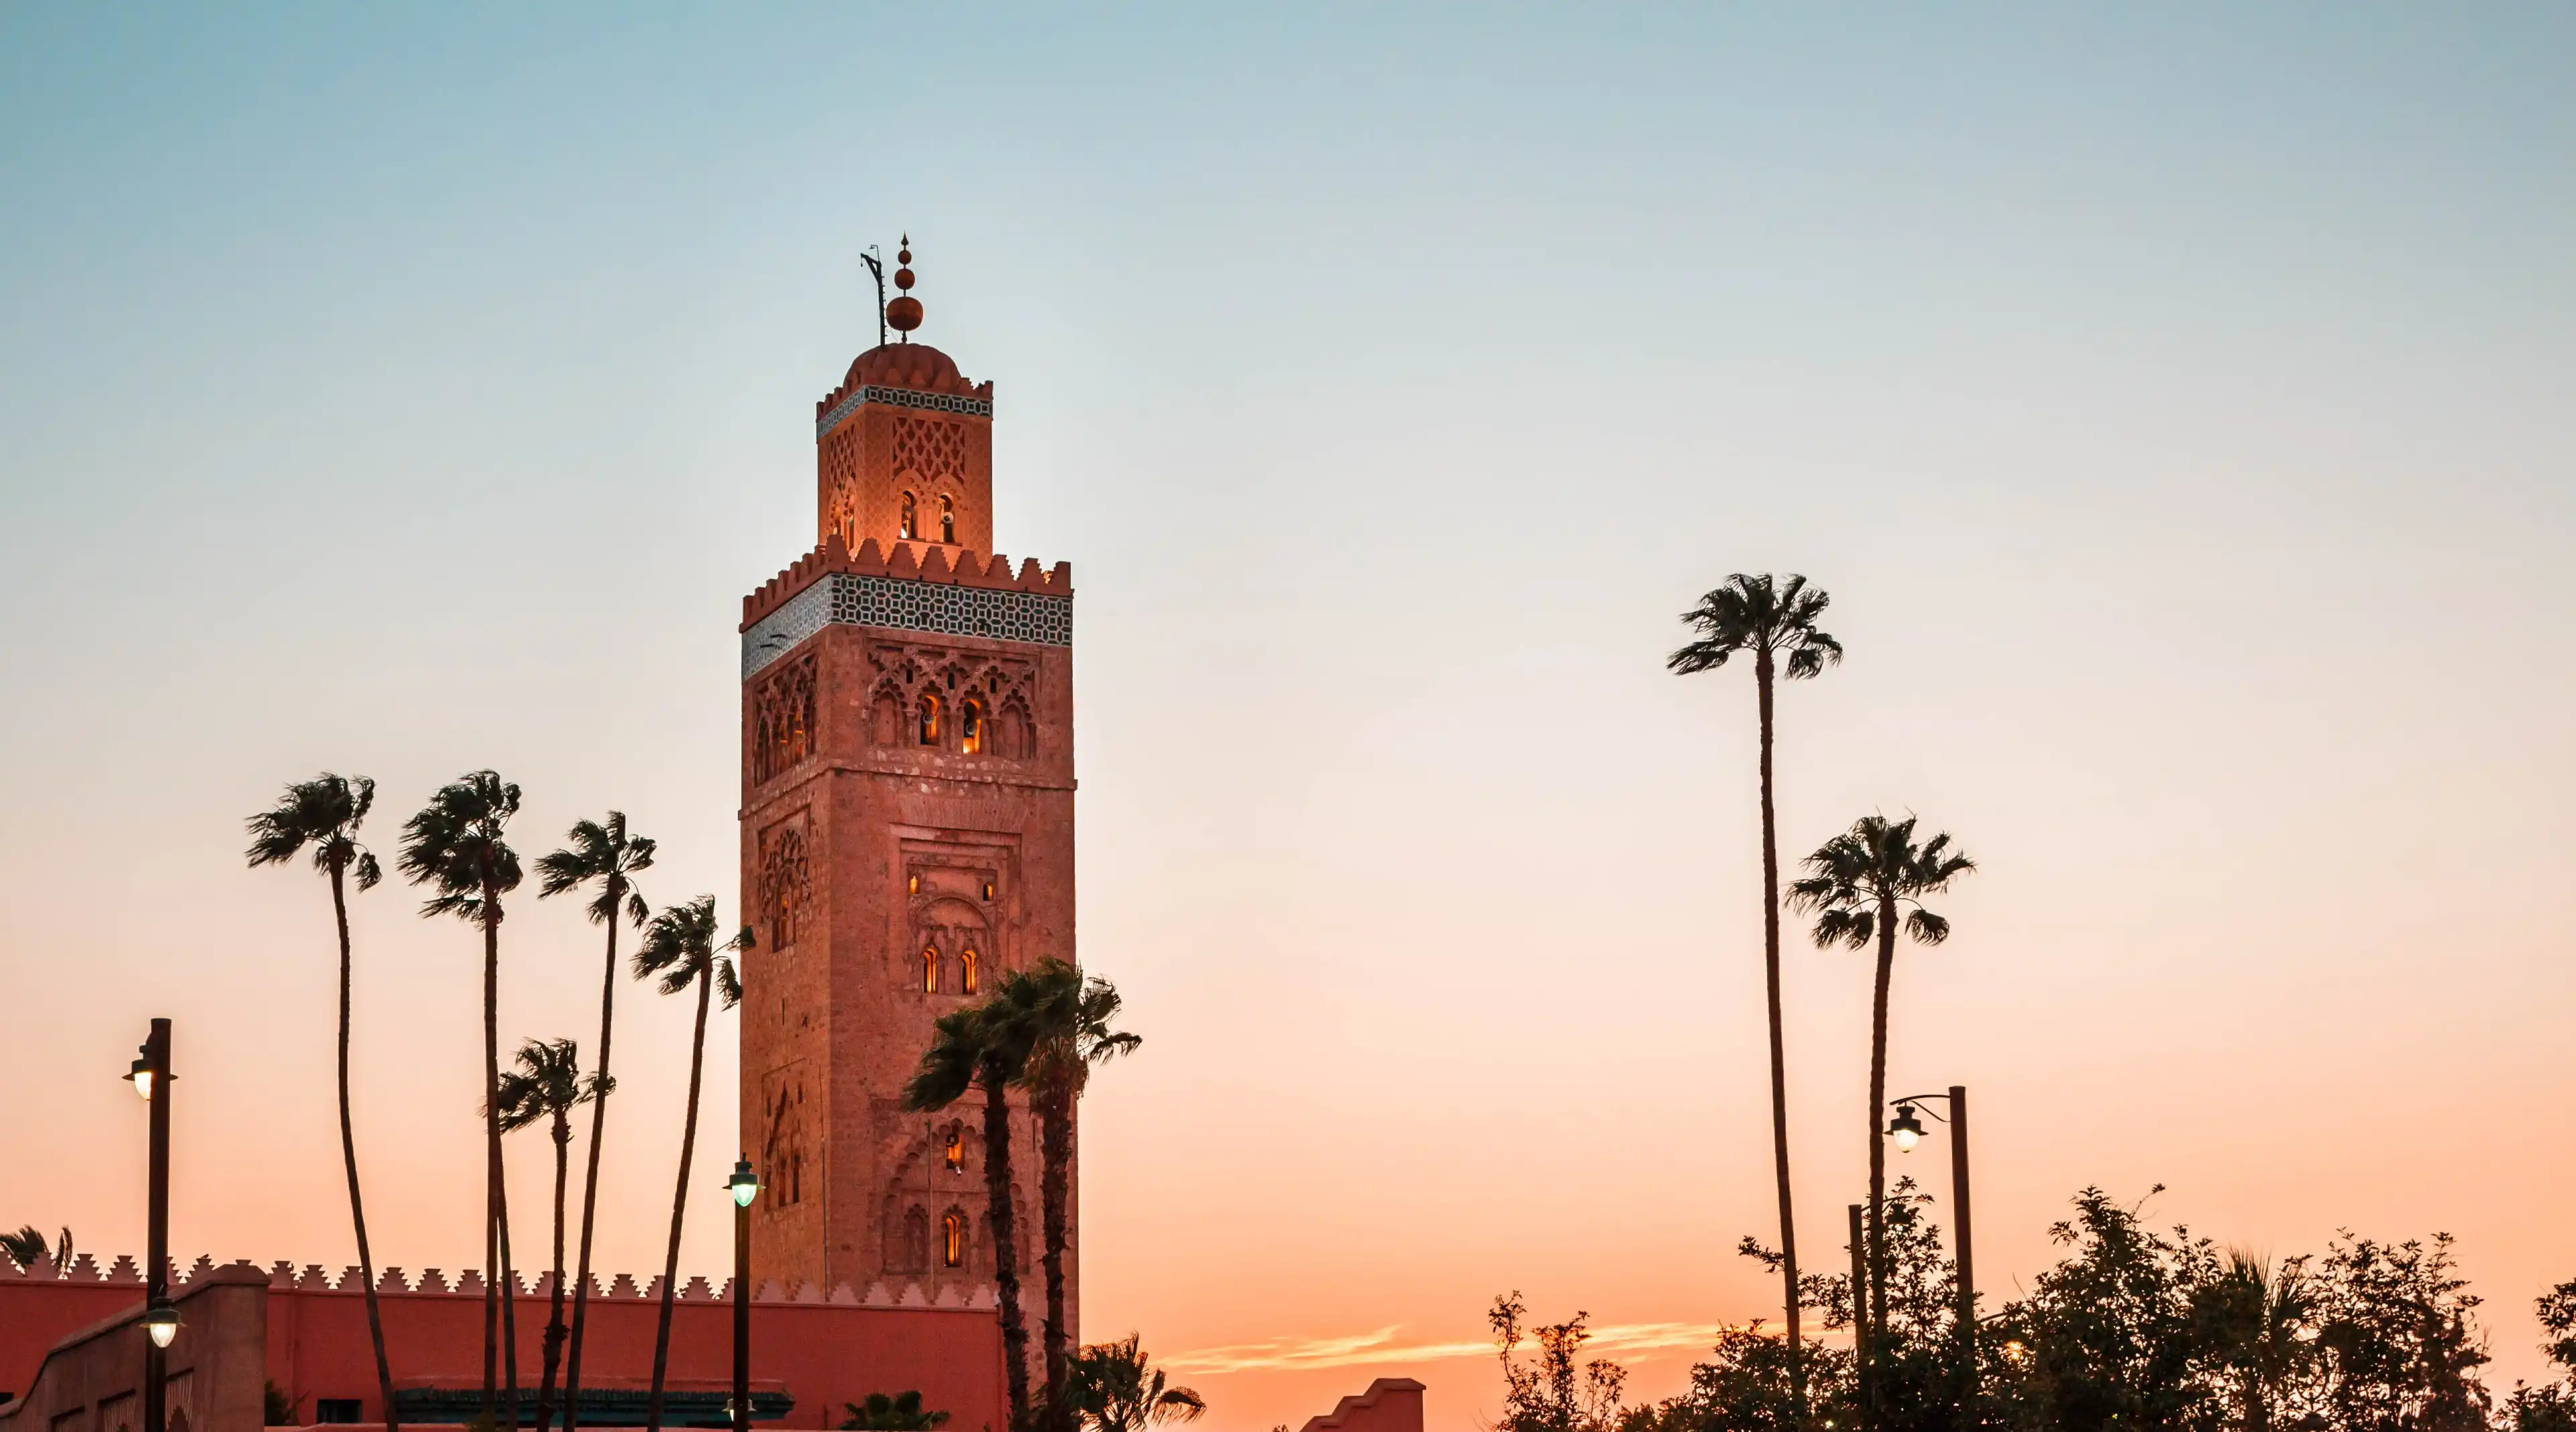 Kutobia Mosque at sunset, Marrakech, Morocco